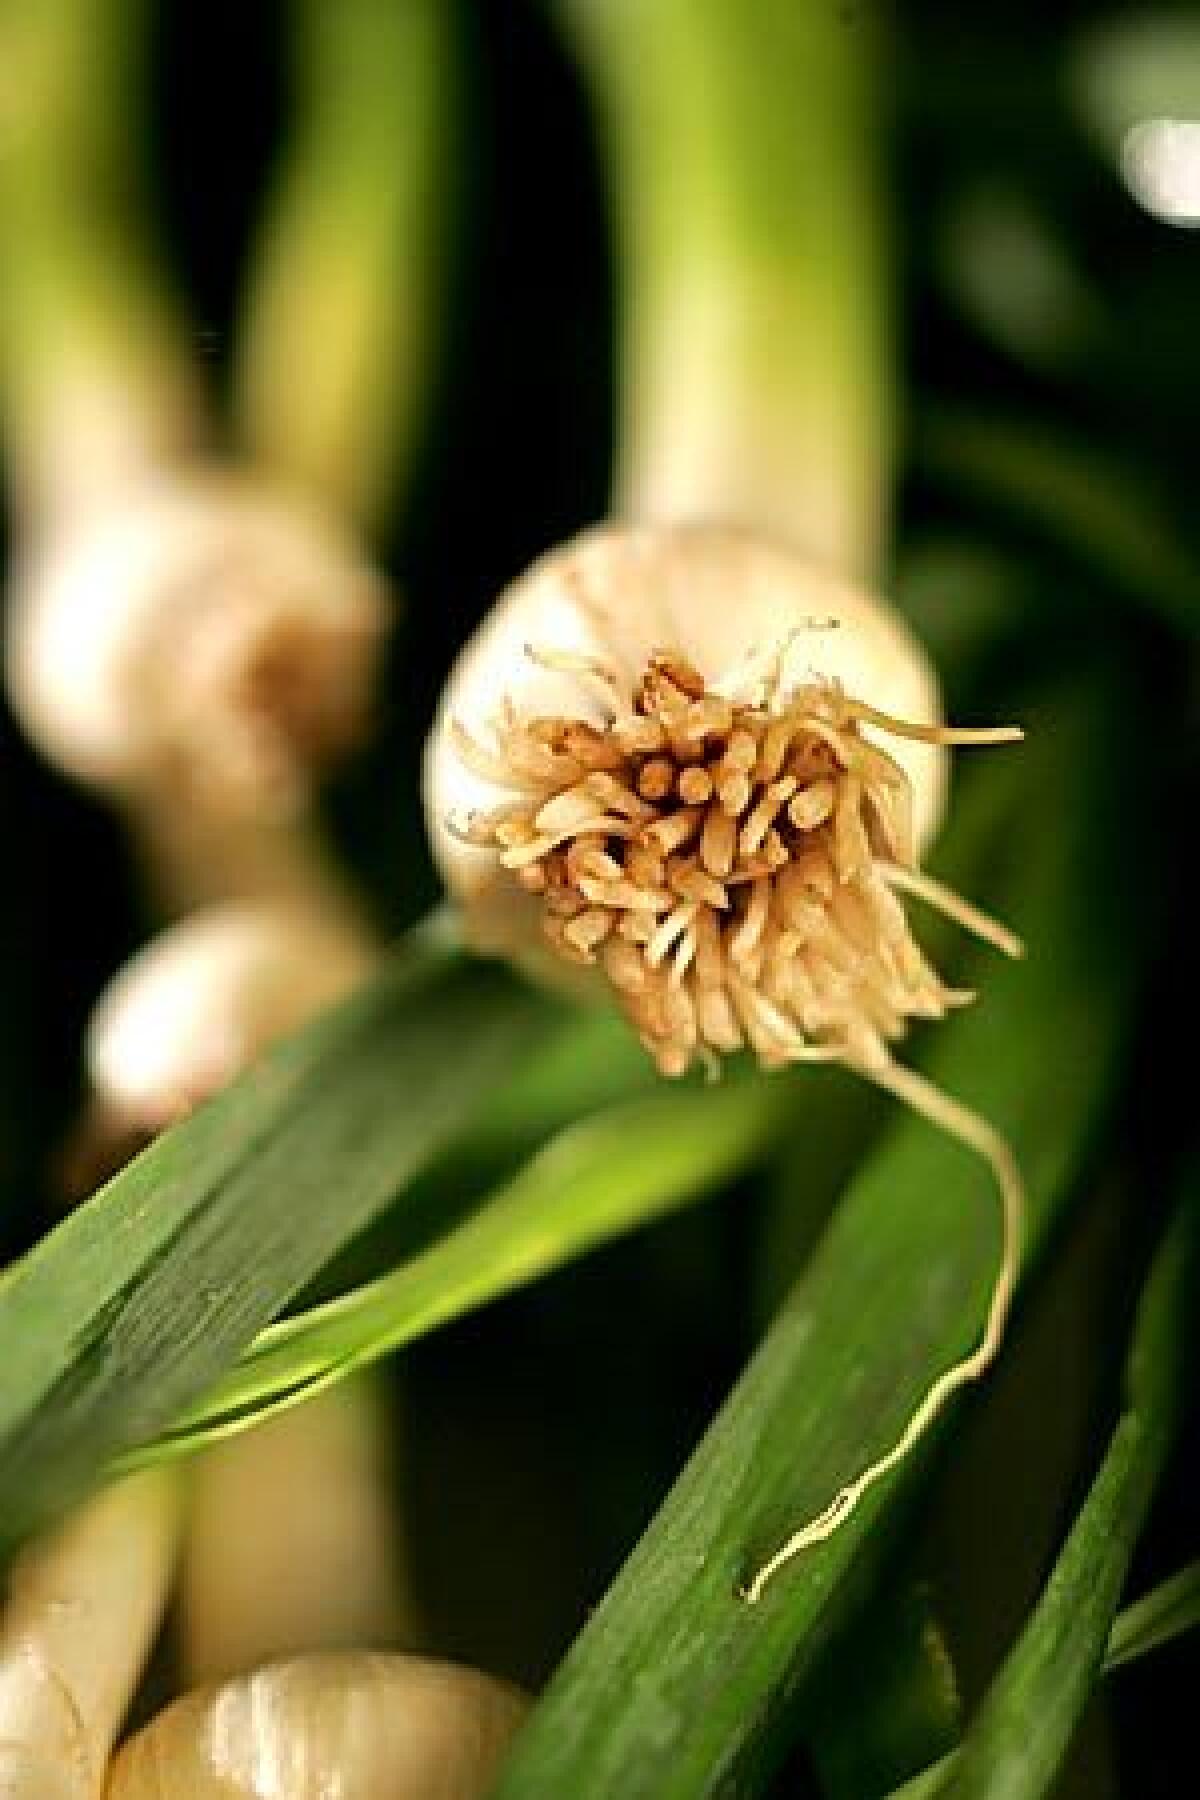 Green garlic, also called young garlic, shows up at farmers markets in early spring.